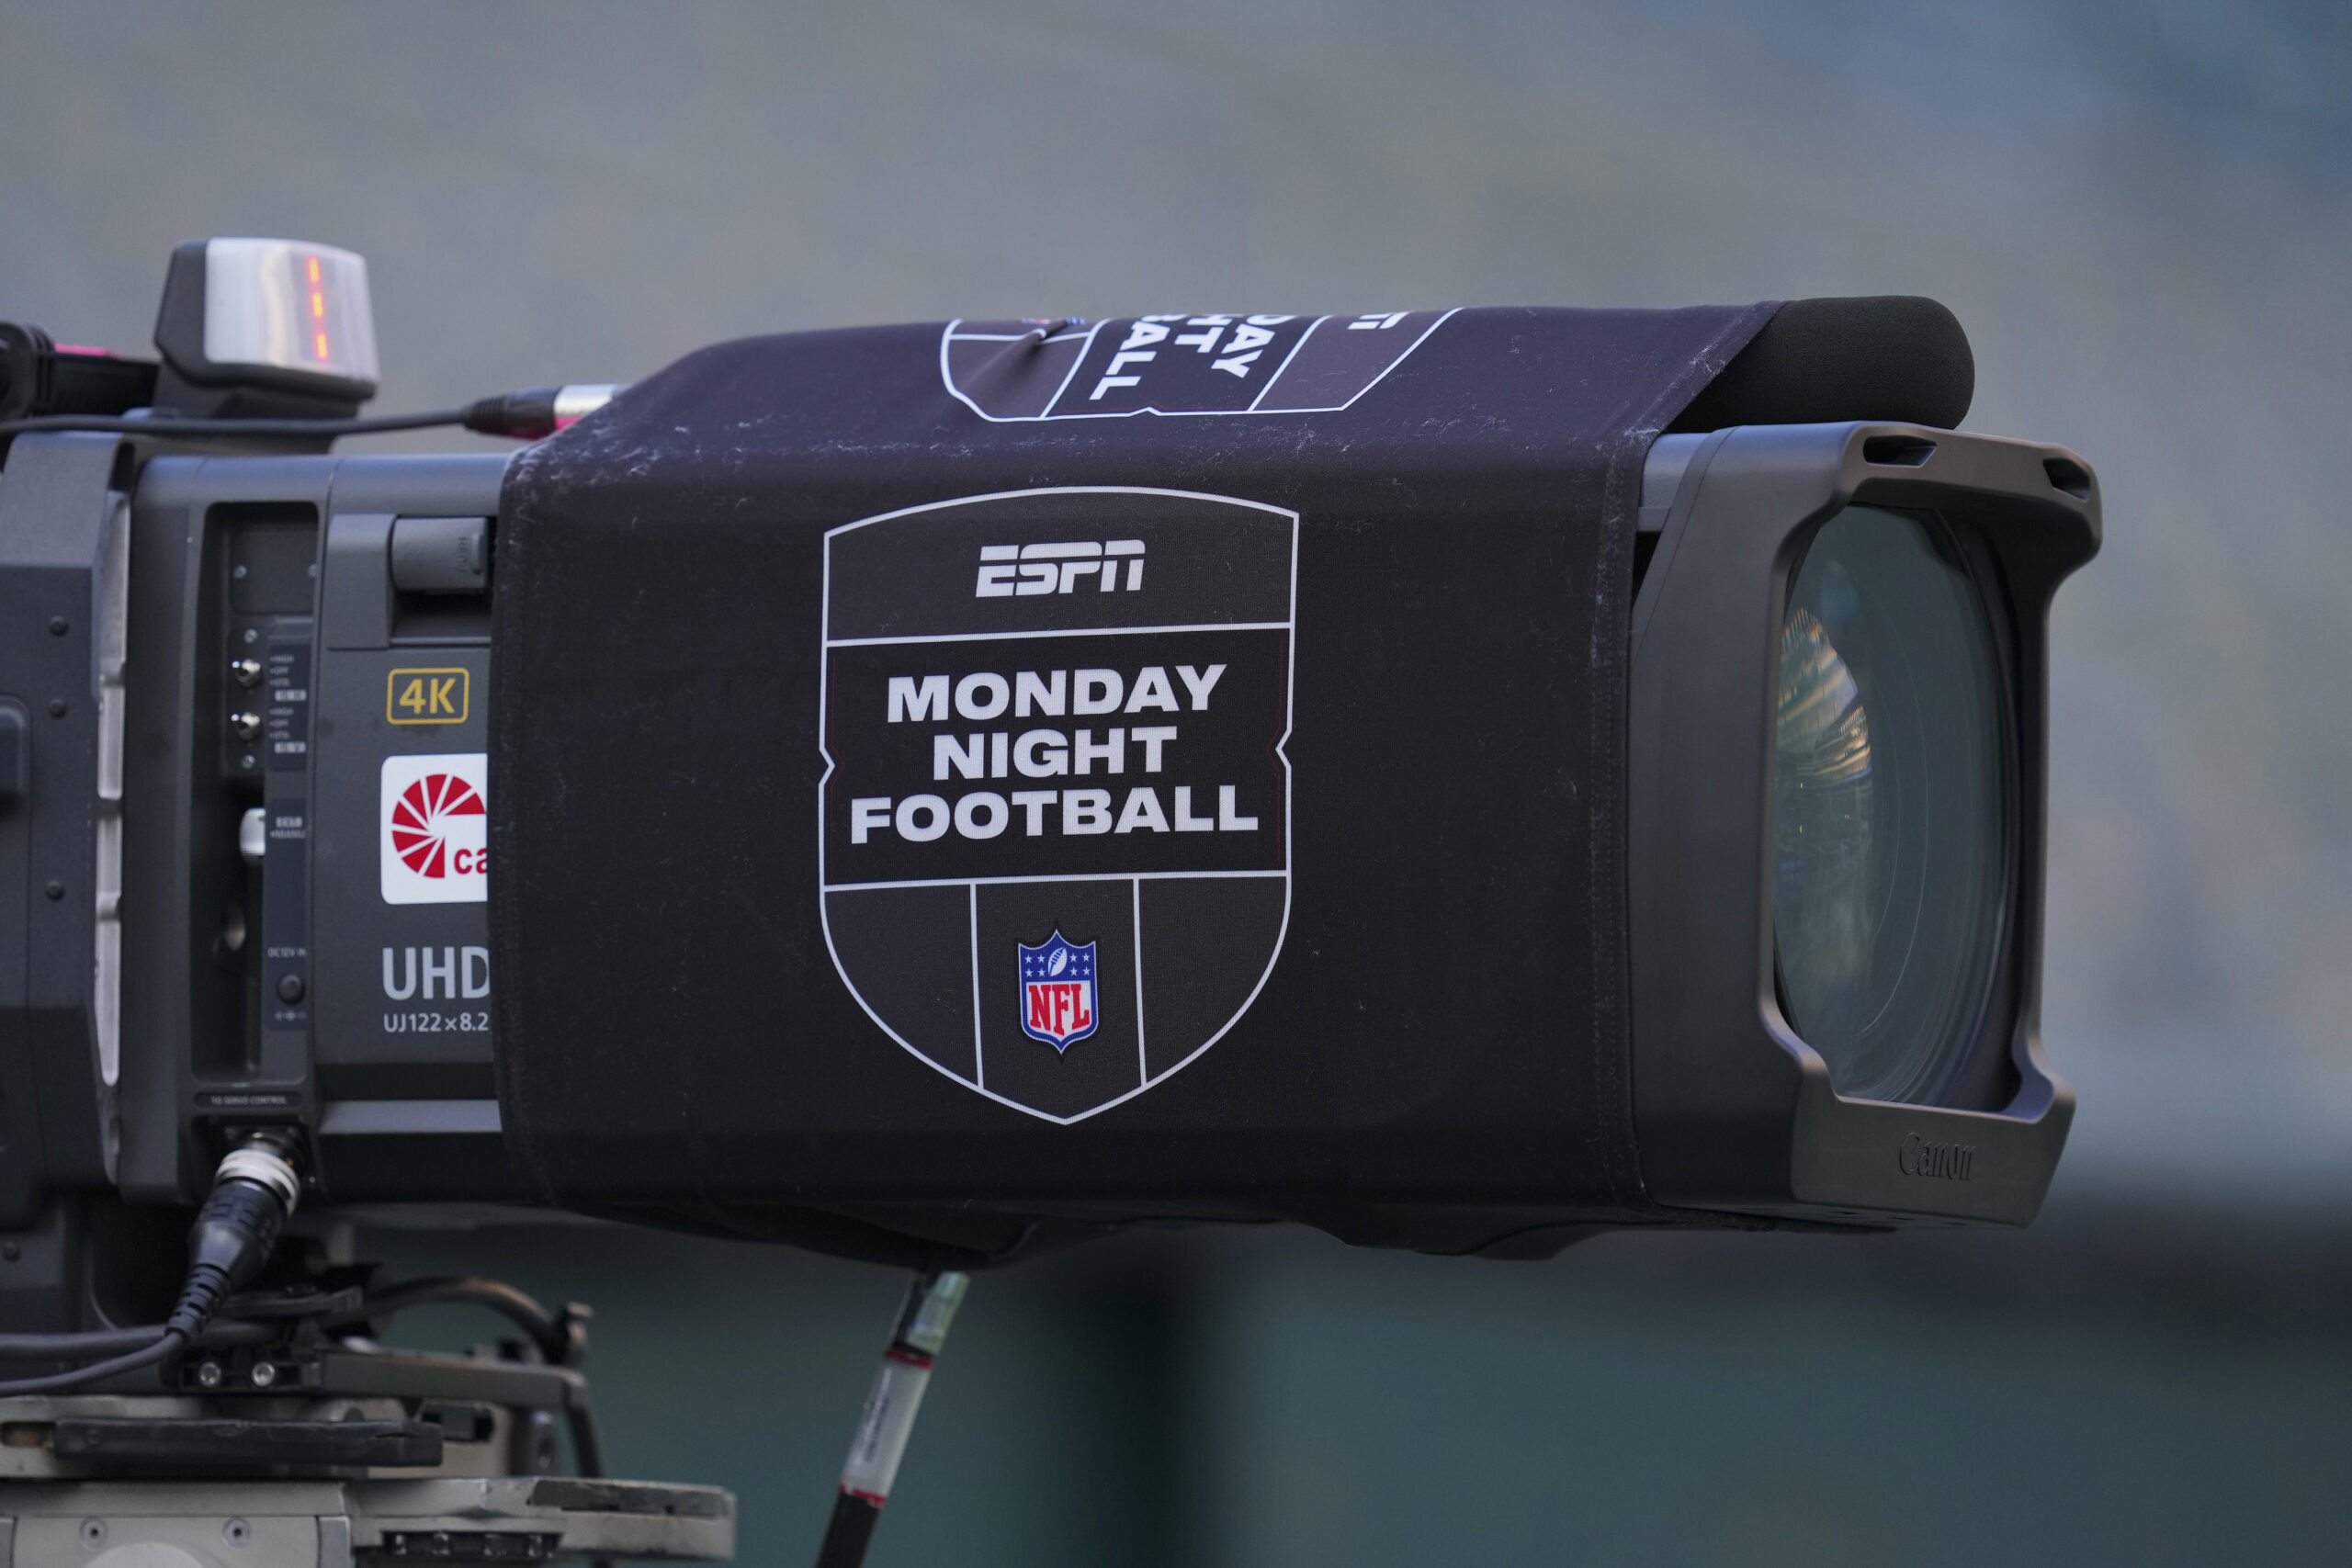 ABC to simulcast 10 more ESPN Monday Night Football games - Sportcal